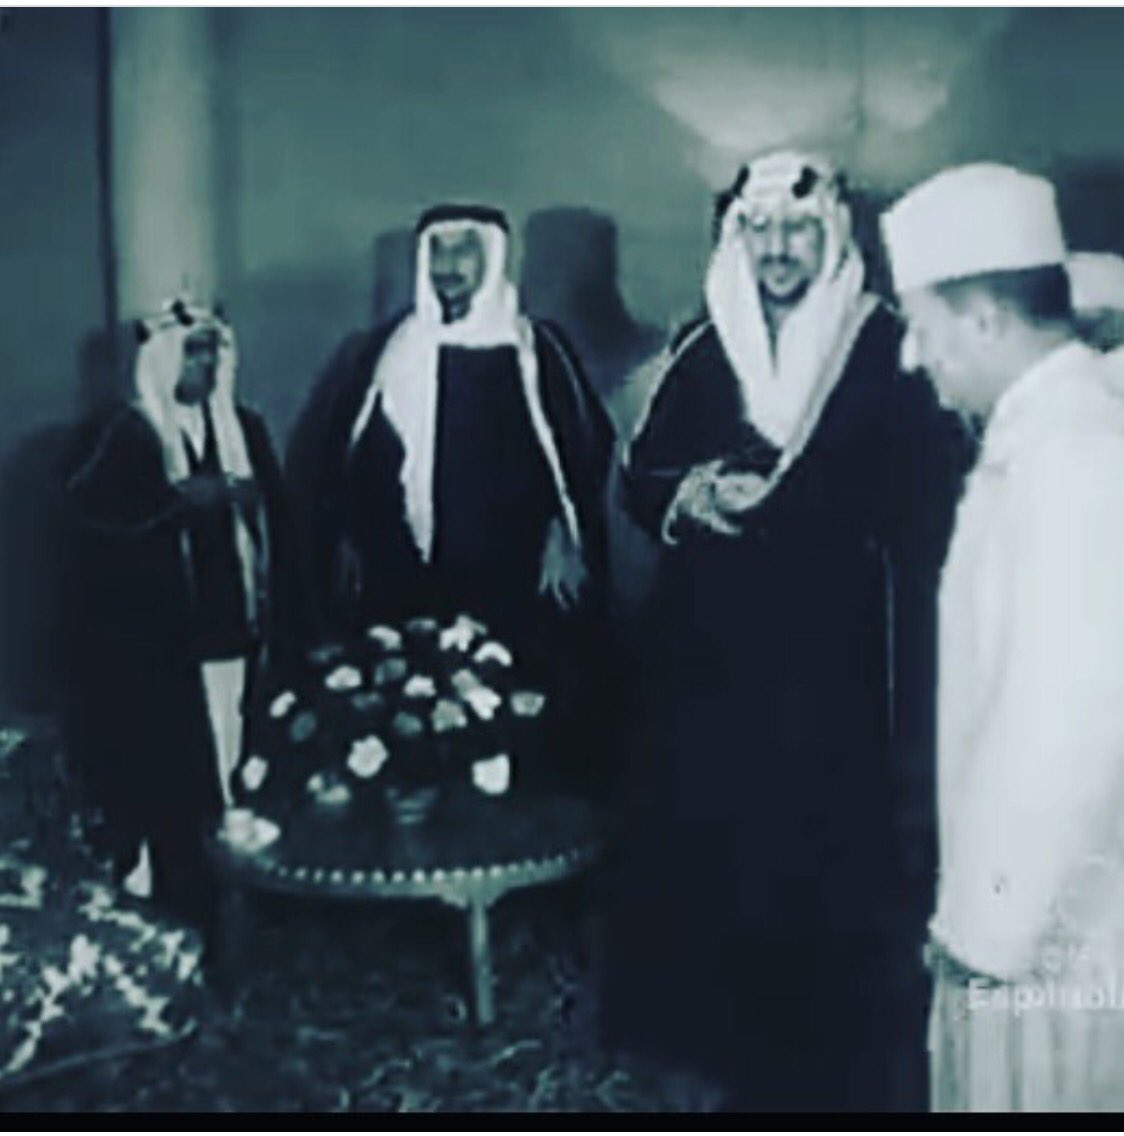 King Saud and King Mohammed V and princes Mohammed bin Saud al-Kabeer and Mussaed bin Abdul Rahman, may God have mercy on them.